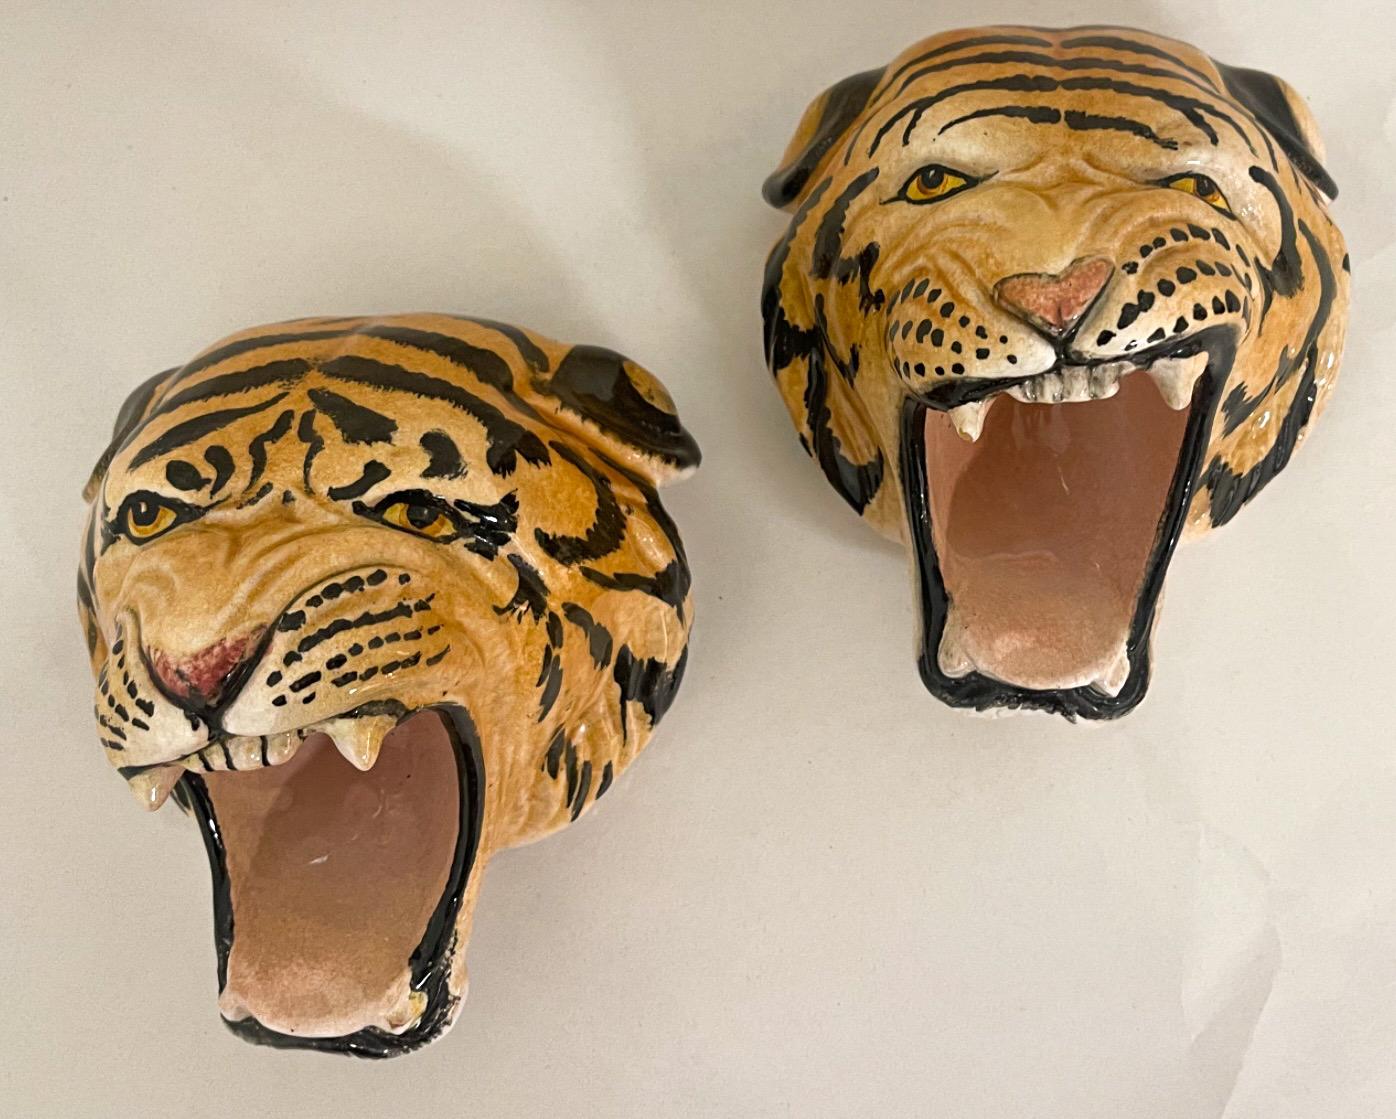 Gifting is upon us! This is a pair of Hollywood Regency Italian terracotta Tiger figurines in very good condition!.